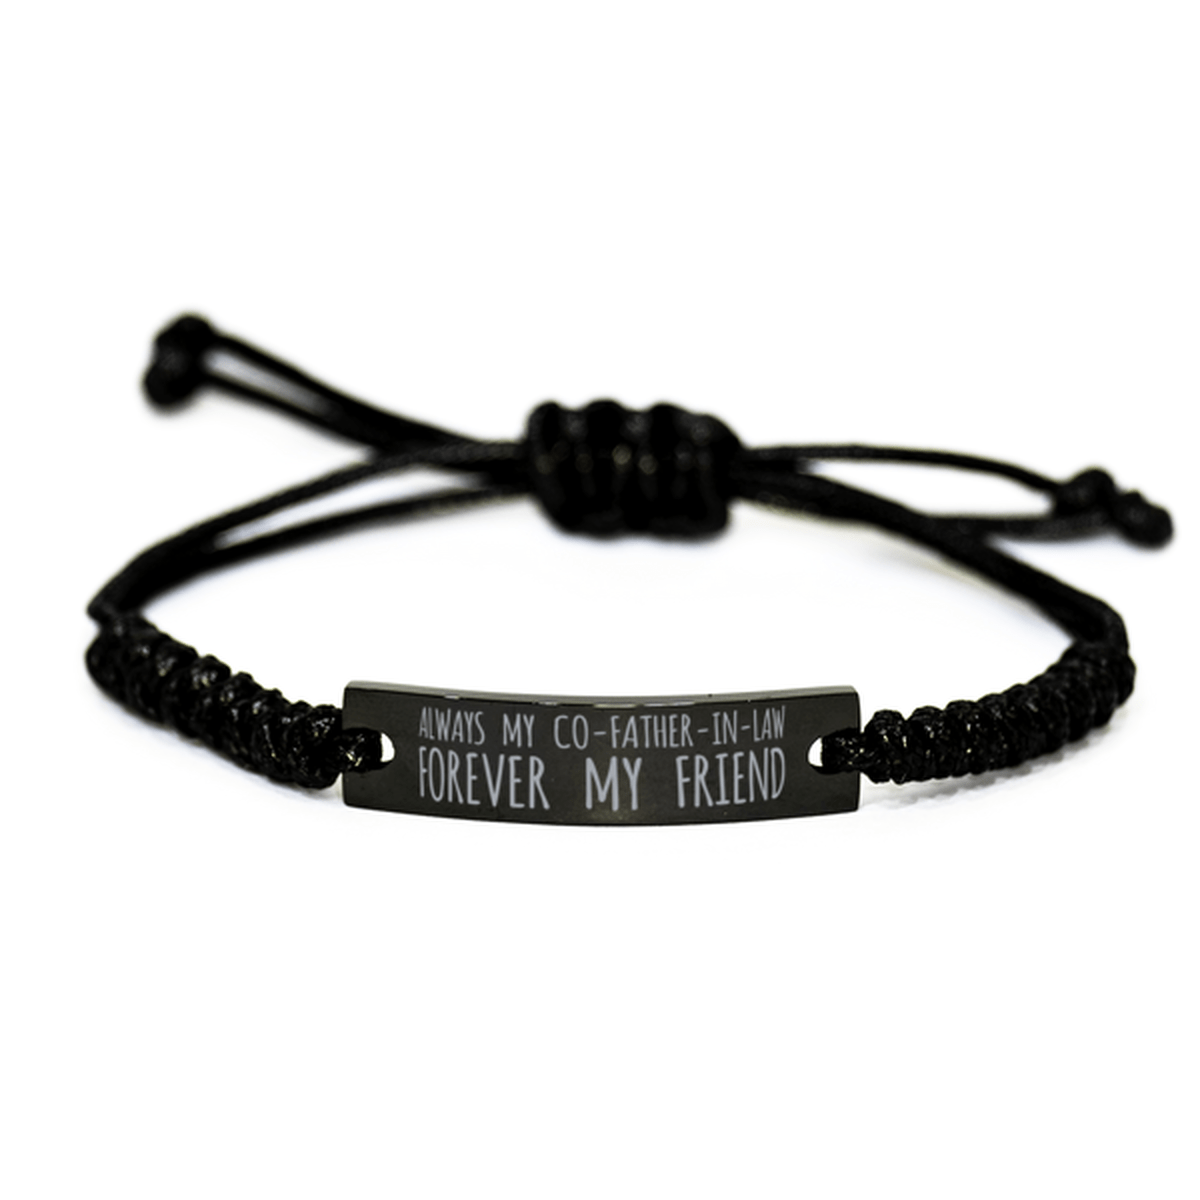 Inspirational Co-Father-In-Law Black Rope Bracelet, Always My Co-Father-In-Law Forever My Friend, Best Birthday Gifts For Family